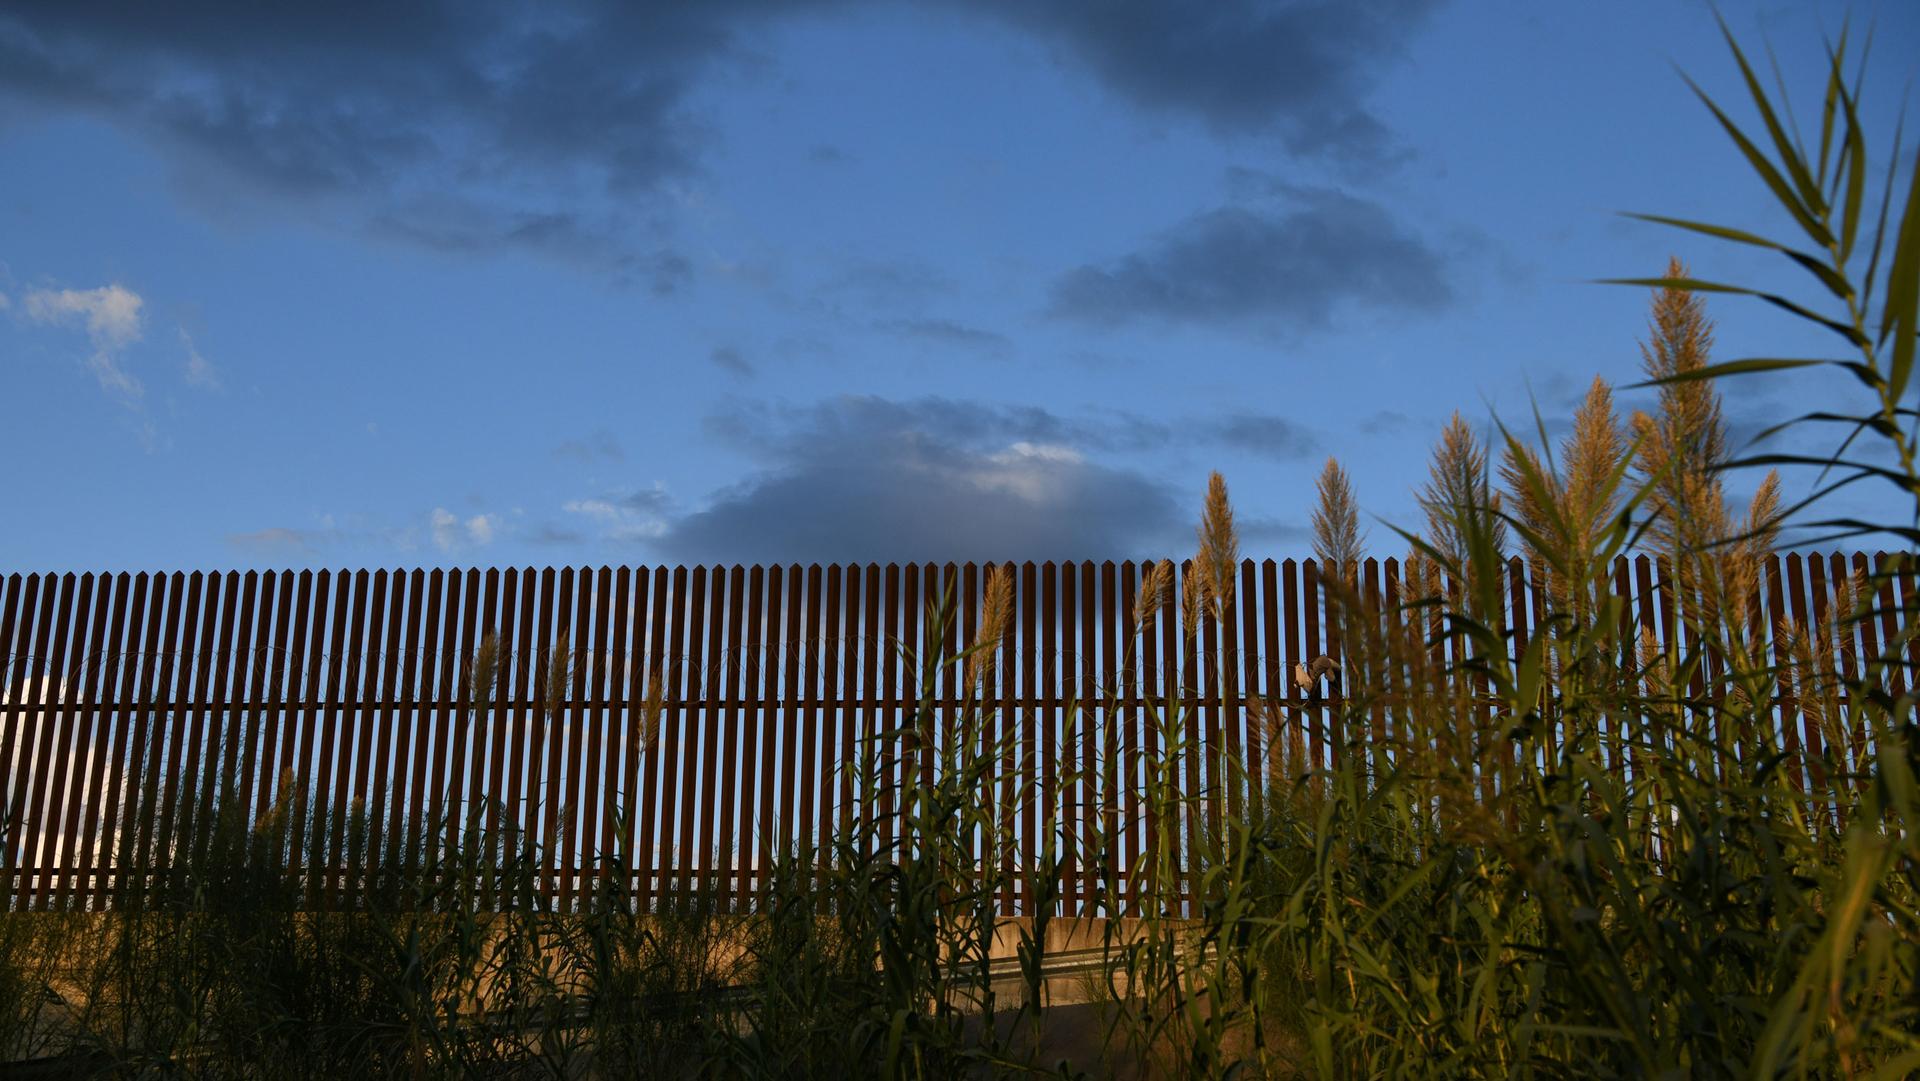 A section of a slatted border fence is shown with greenery in the nearground and dark clouds in the distance.